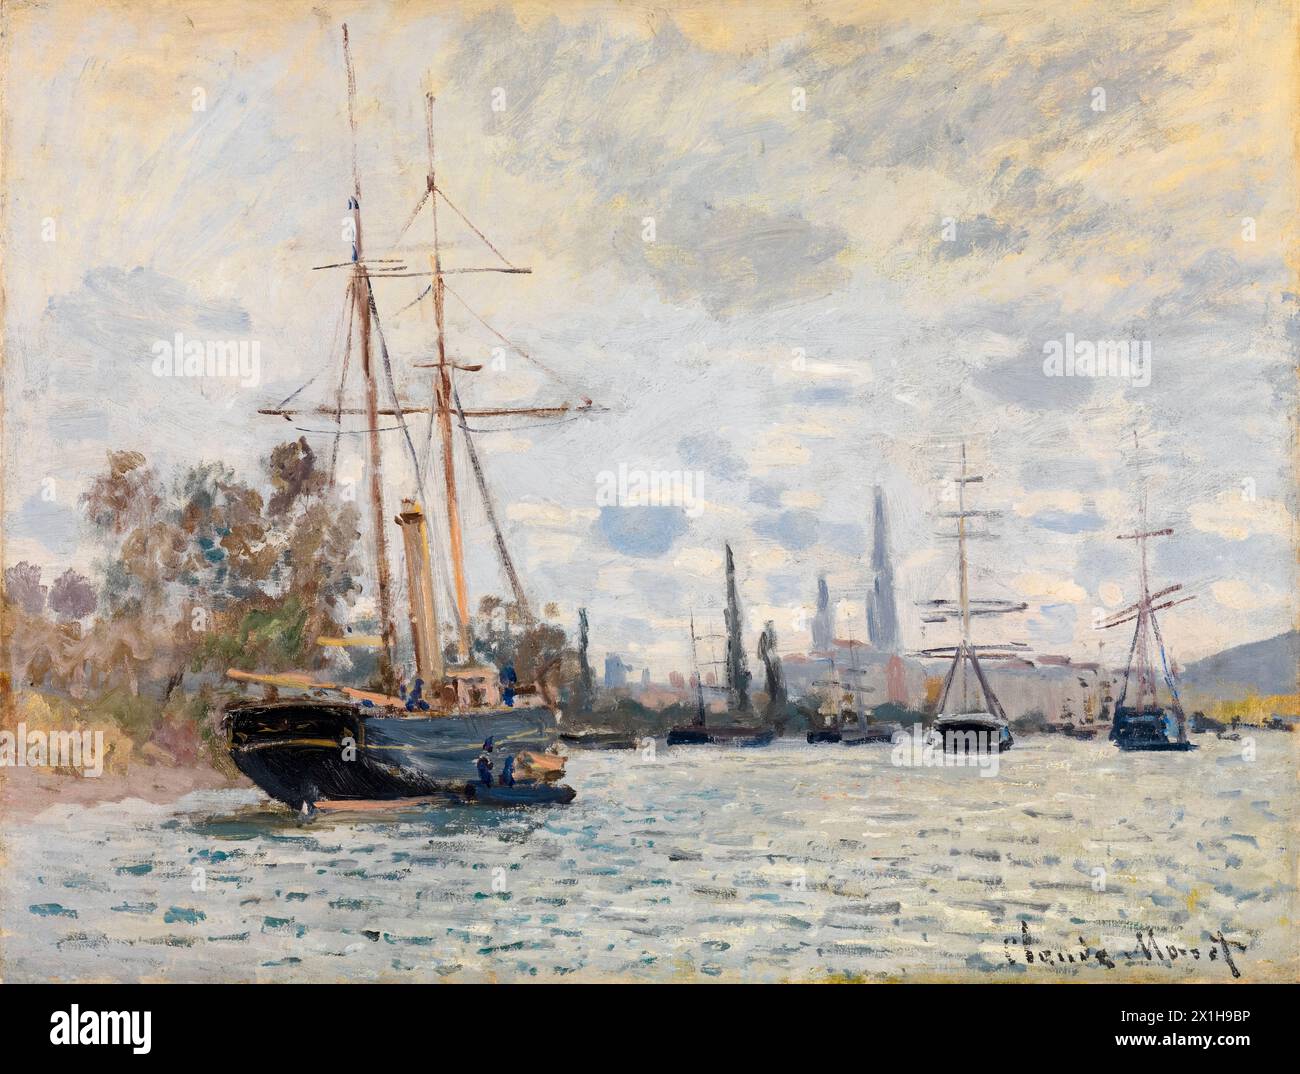 Claude Monet, The Seine near Rouen, painting in oil on canvas, 1874 Stock Photo